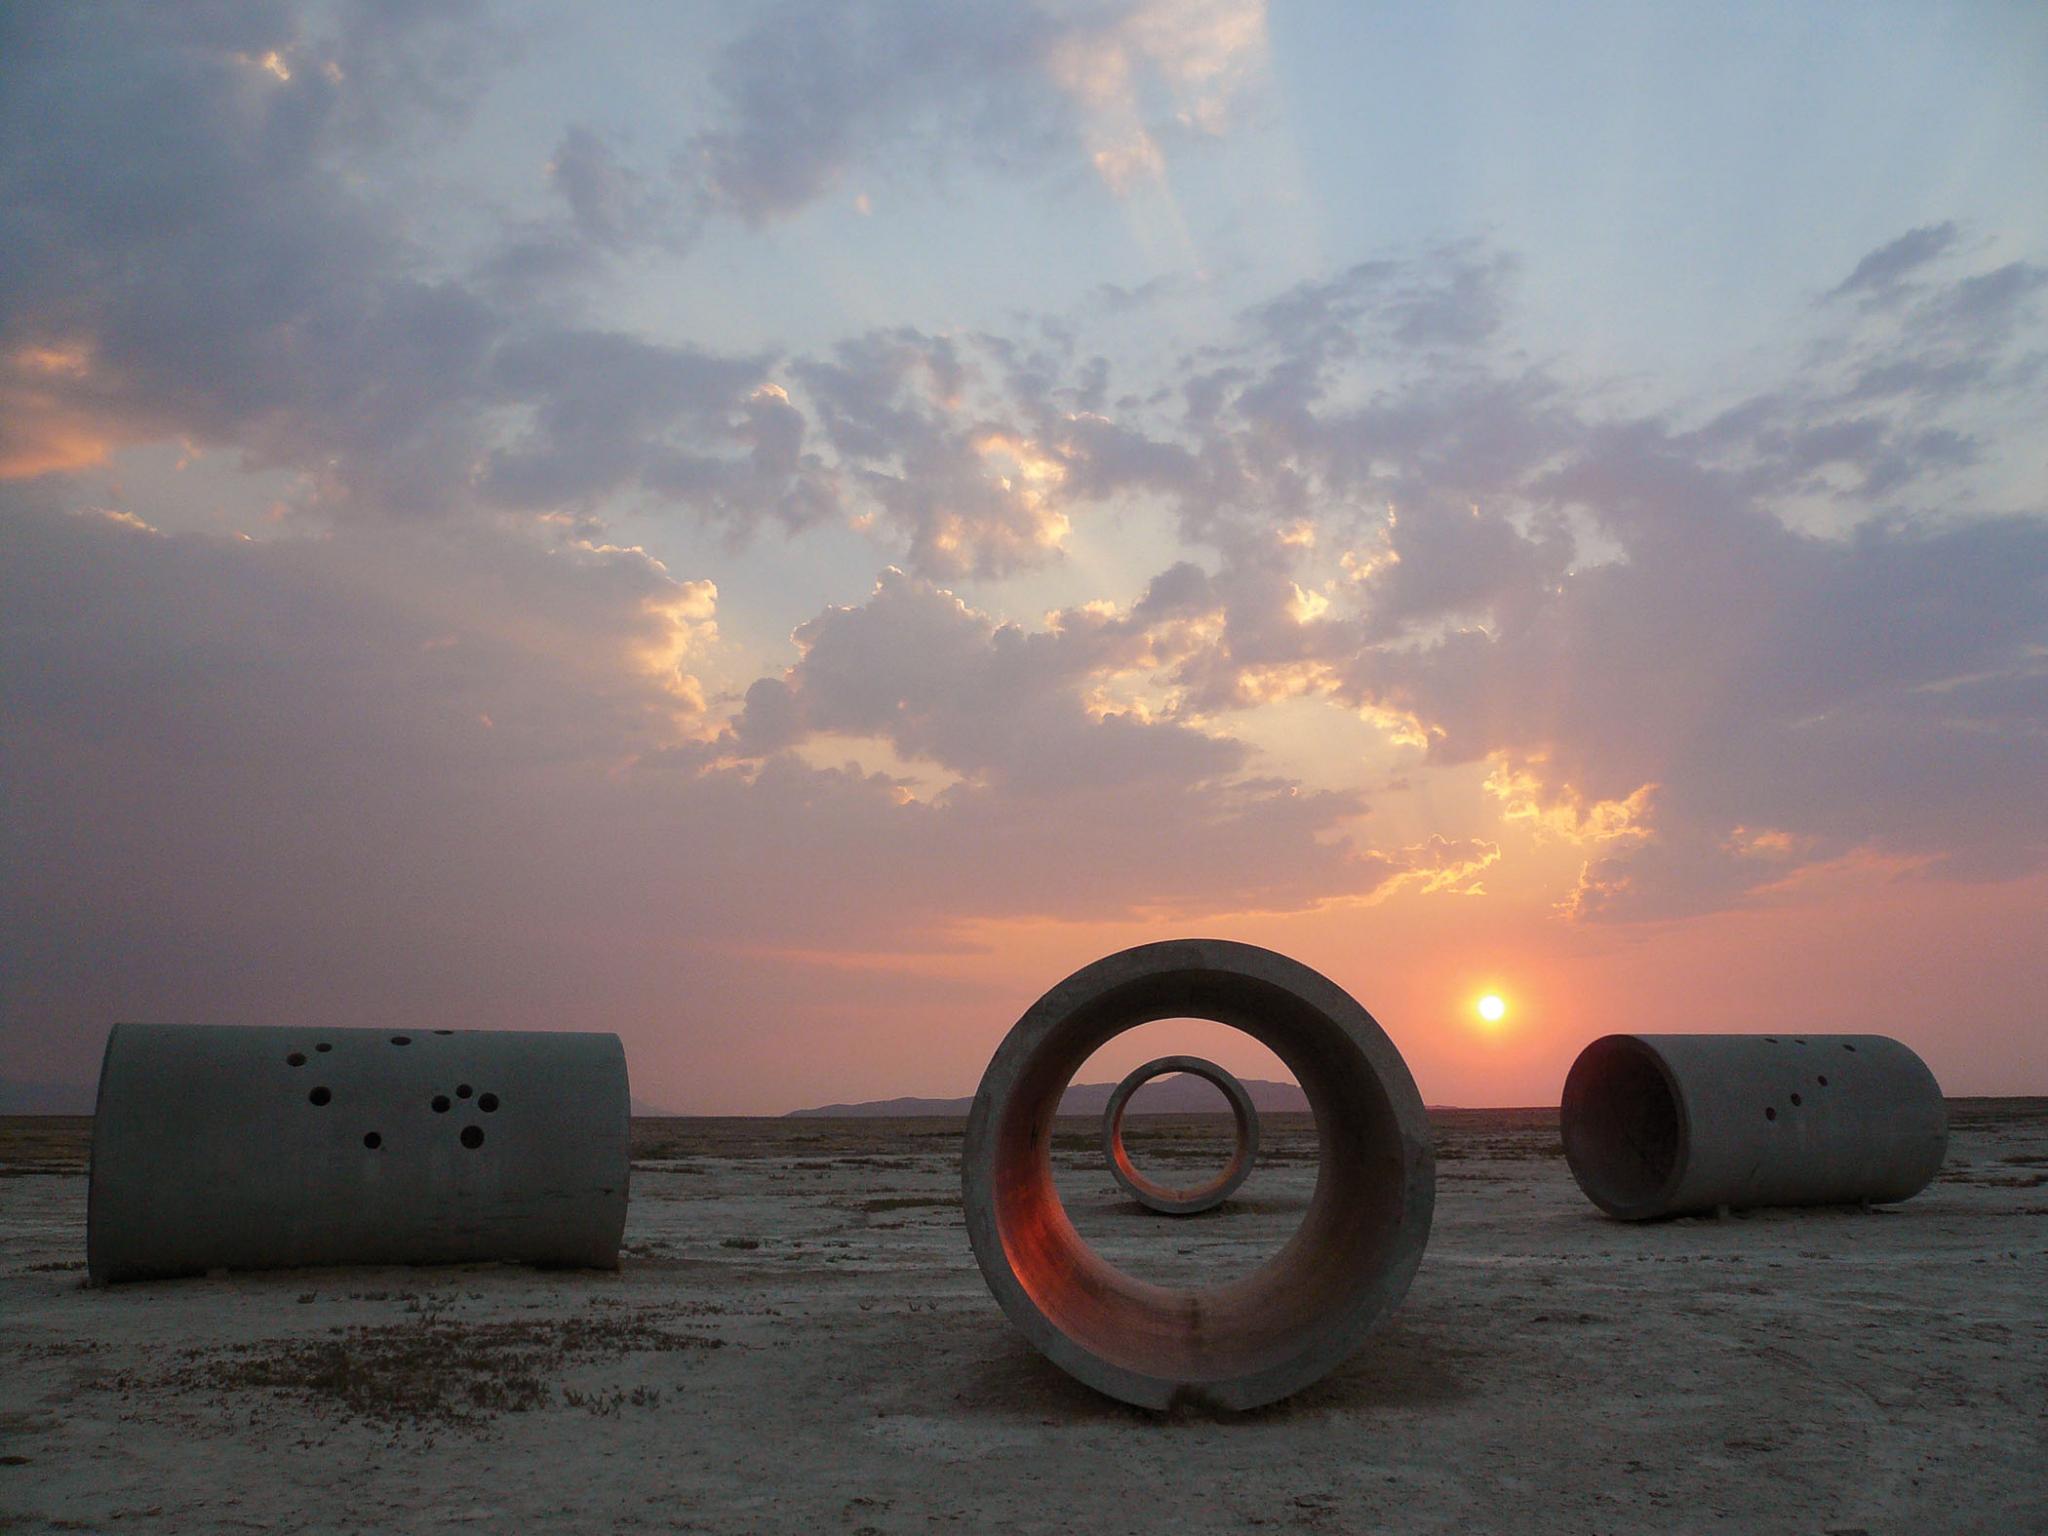 The four concrete cylinders that make Sun Tunnels seen in the light of the setting sun.